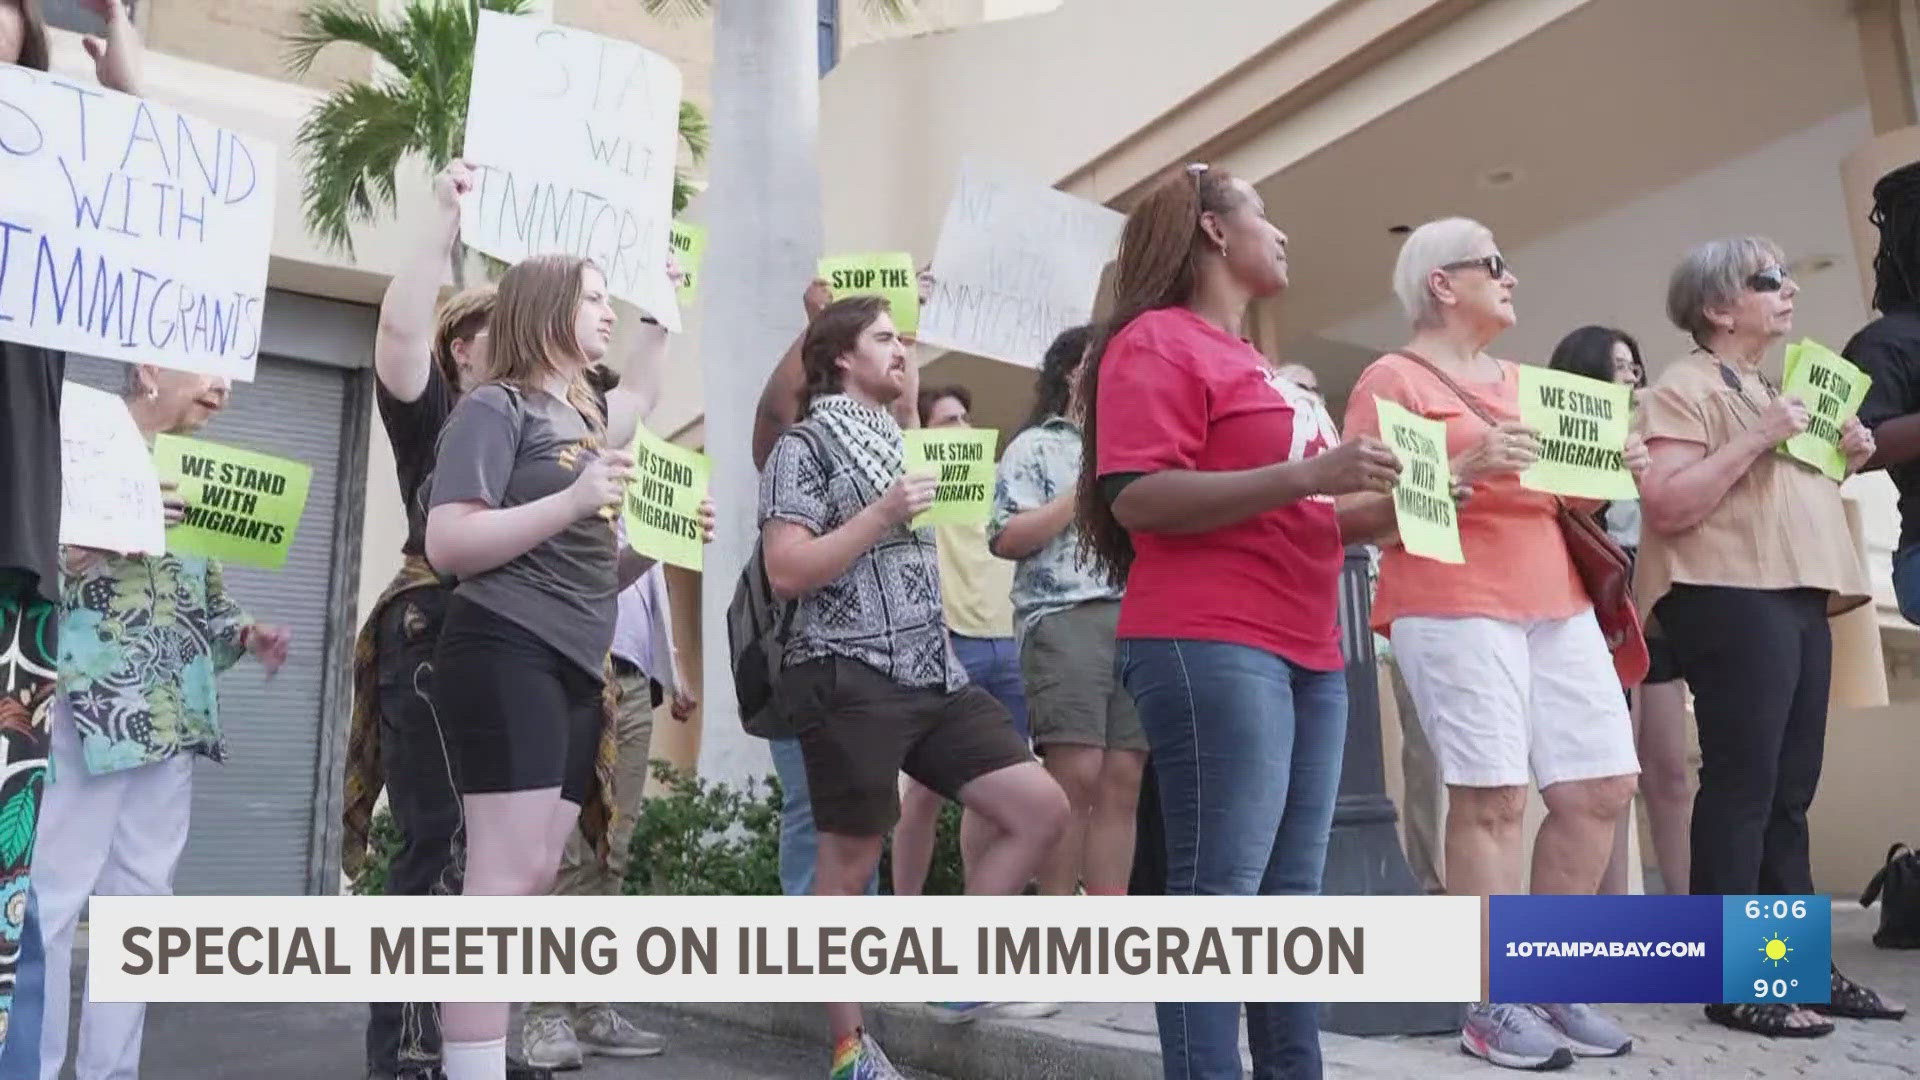 Critics have decried the meeting and said it was aimed at blaming the immigrant population for draining local resources.